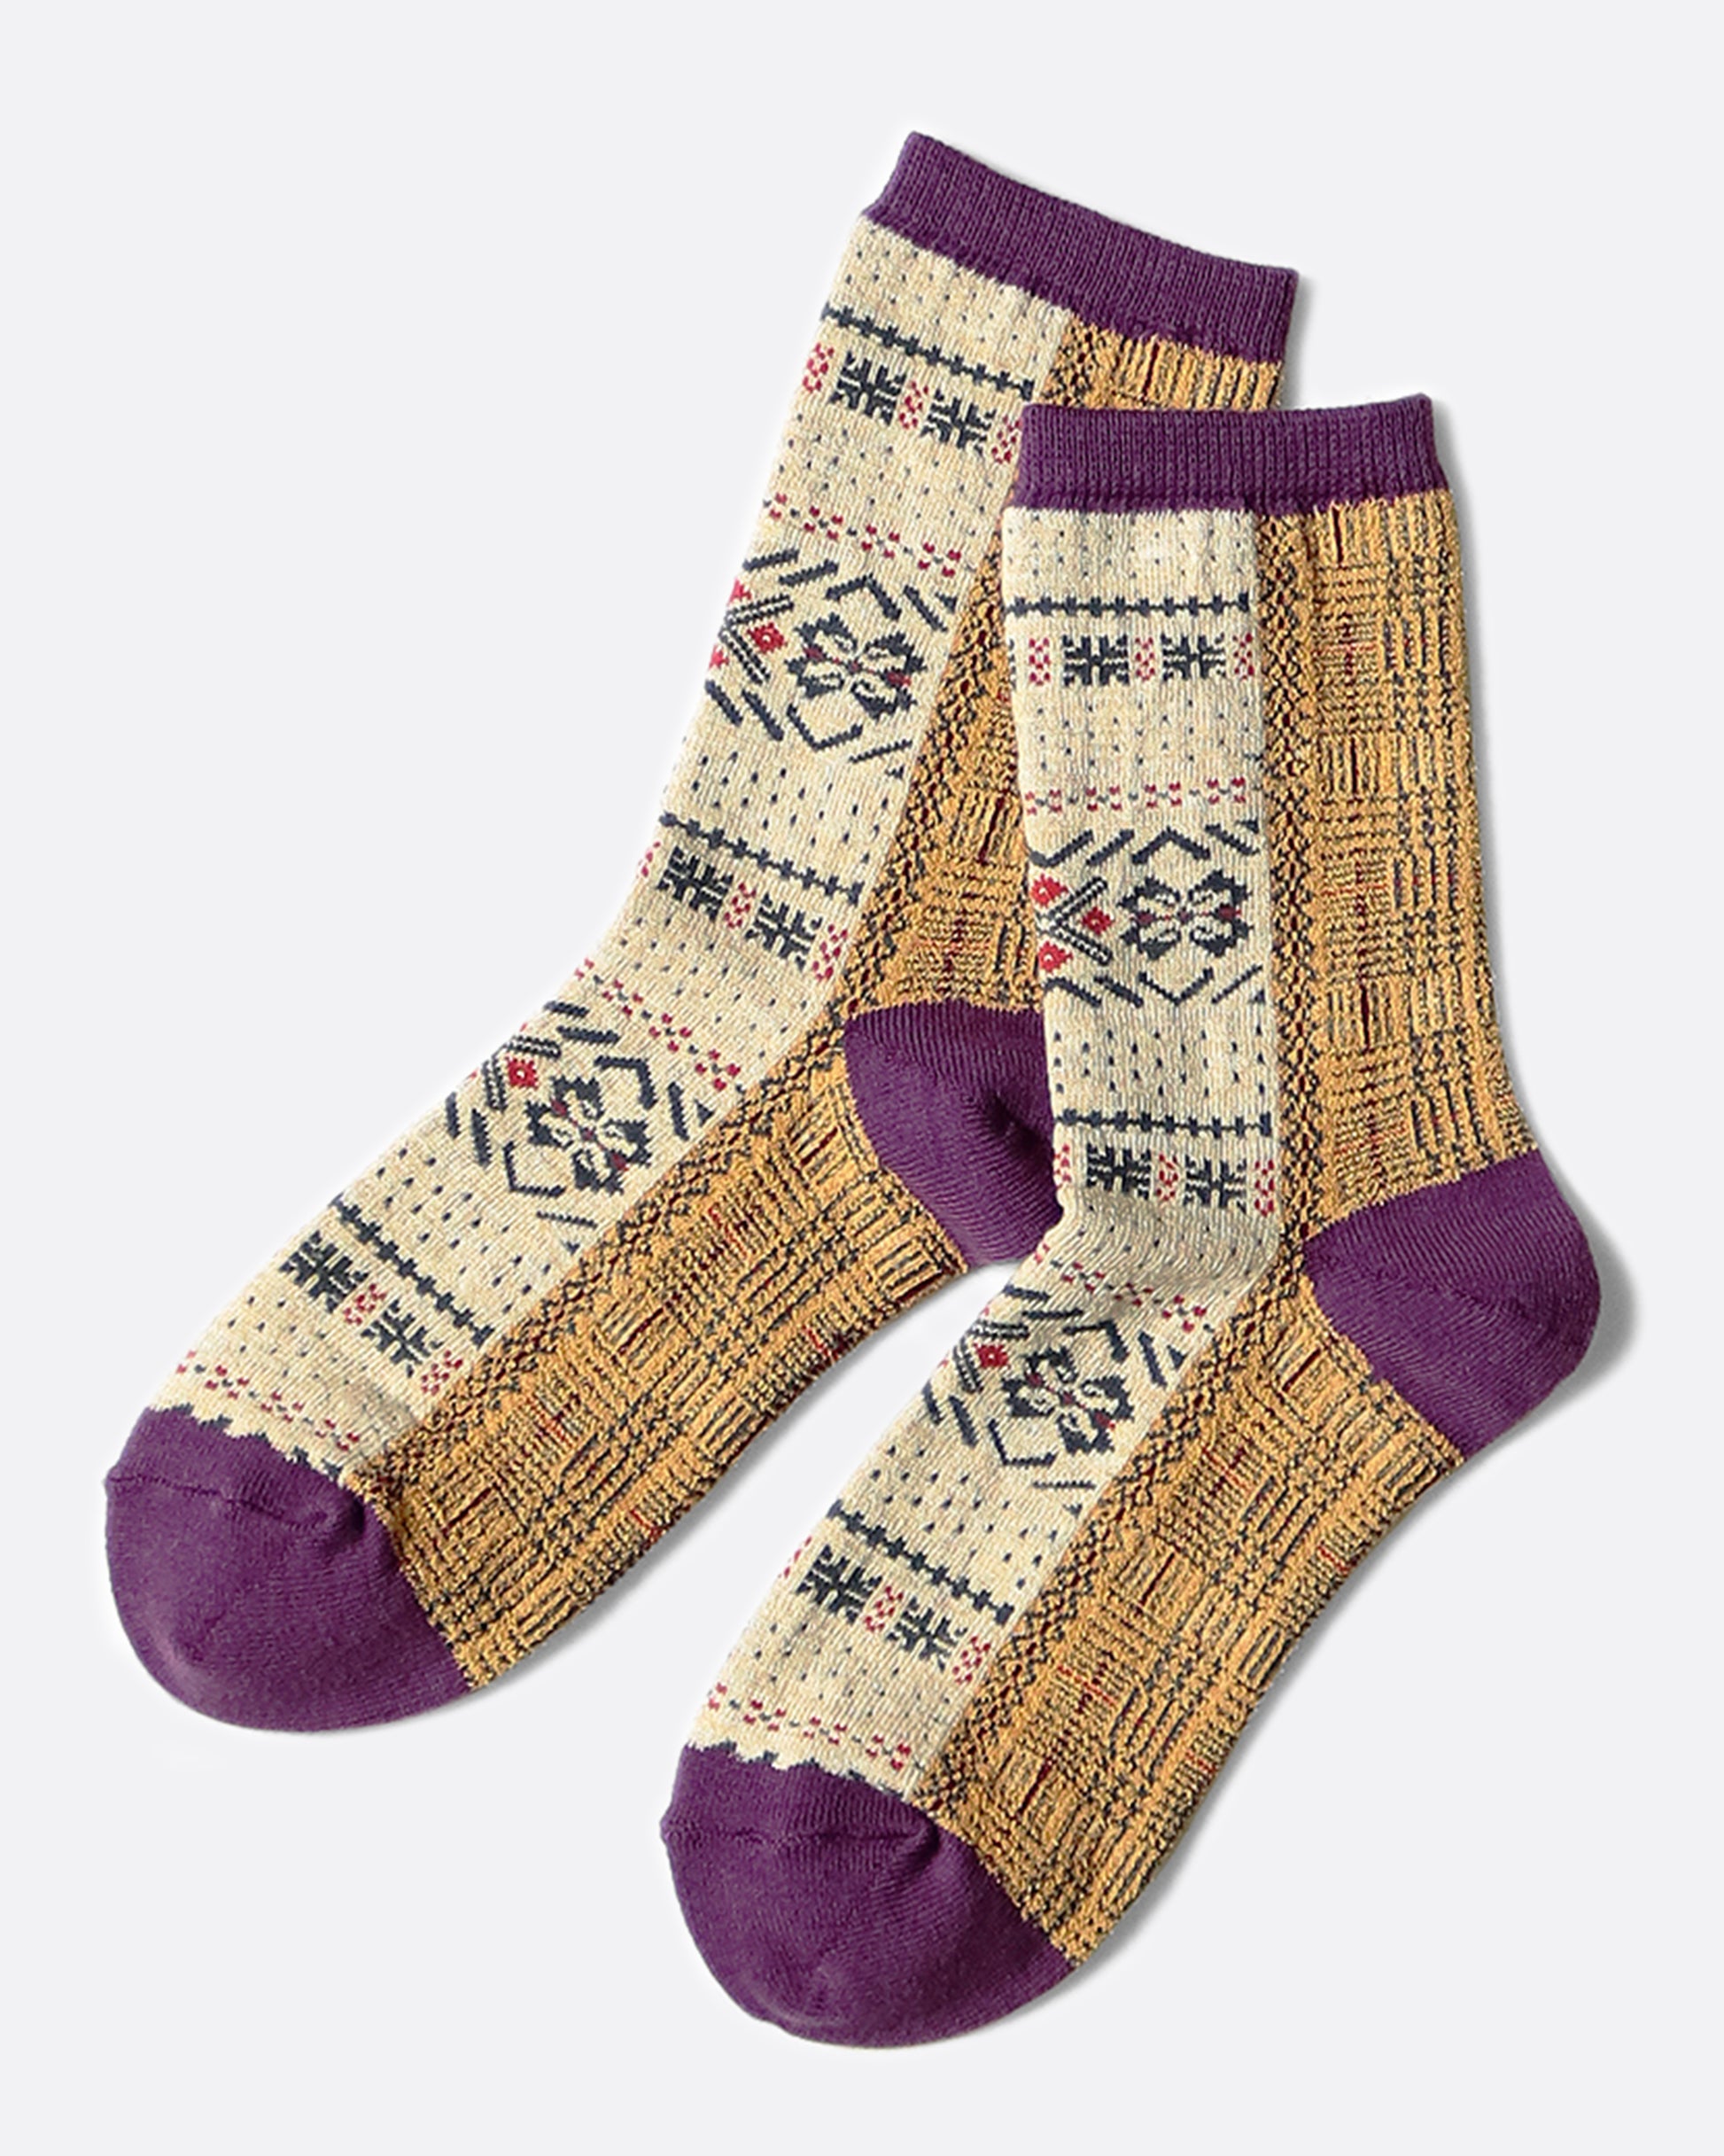 Woven with a beautiful fair isle pattern, these socks hit mid-calf and are comfortable in shoes or around the house.